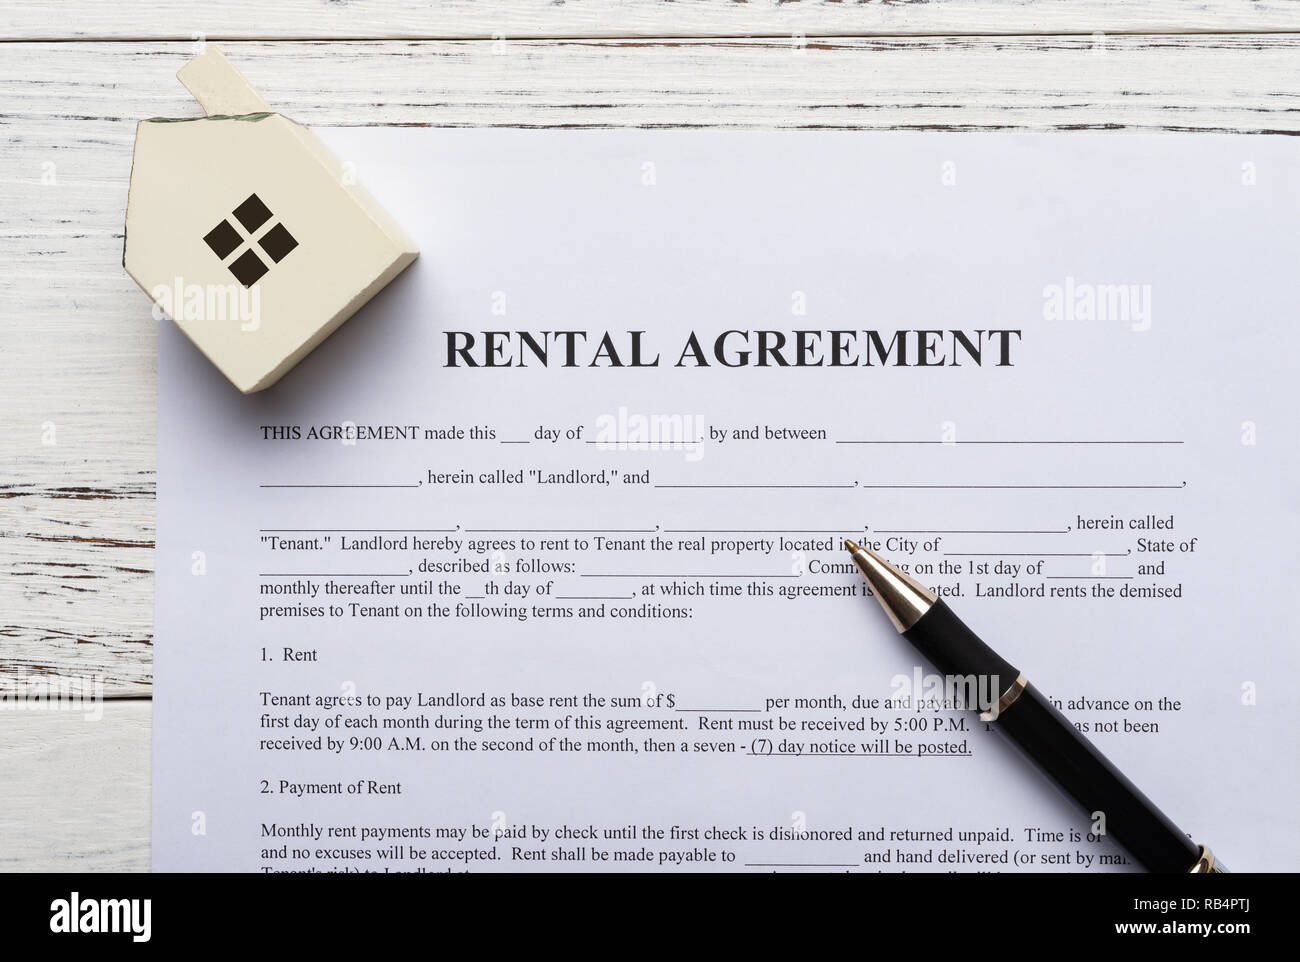 top view rental agreement contact with an architectural model and a pen Stock Photo